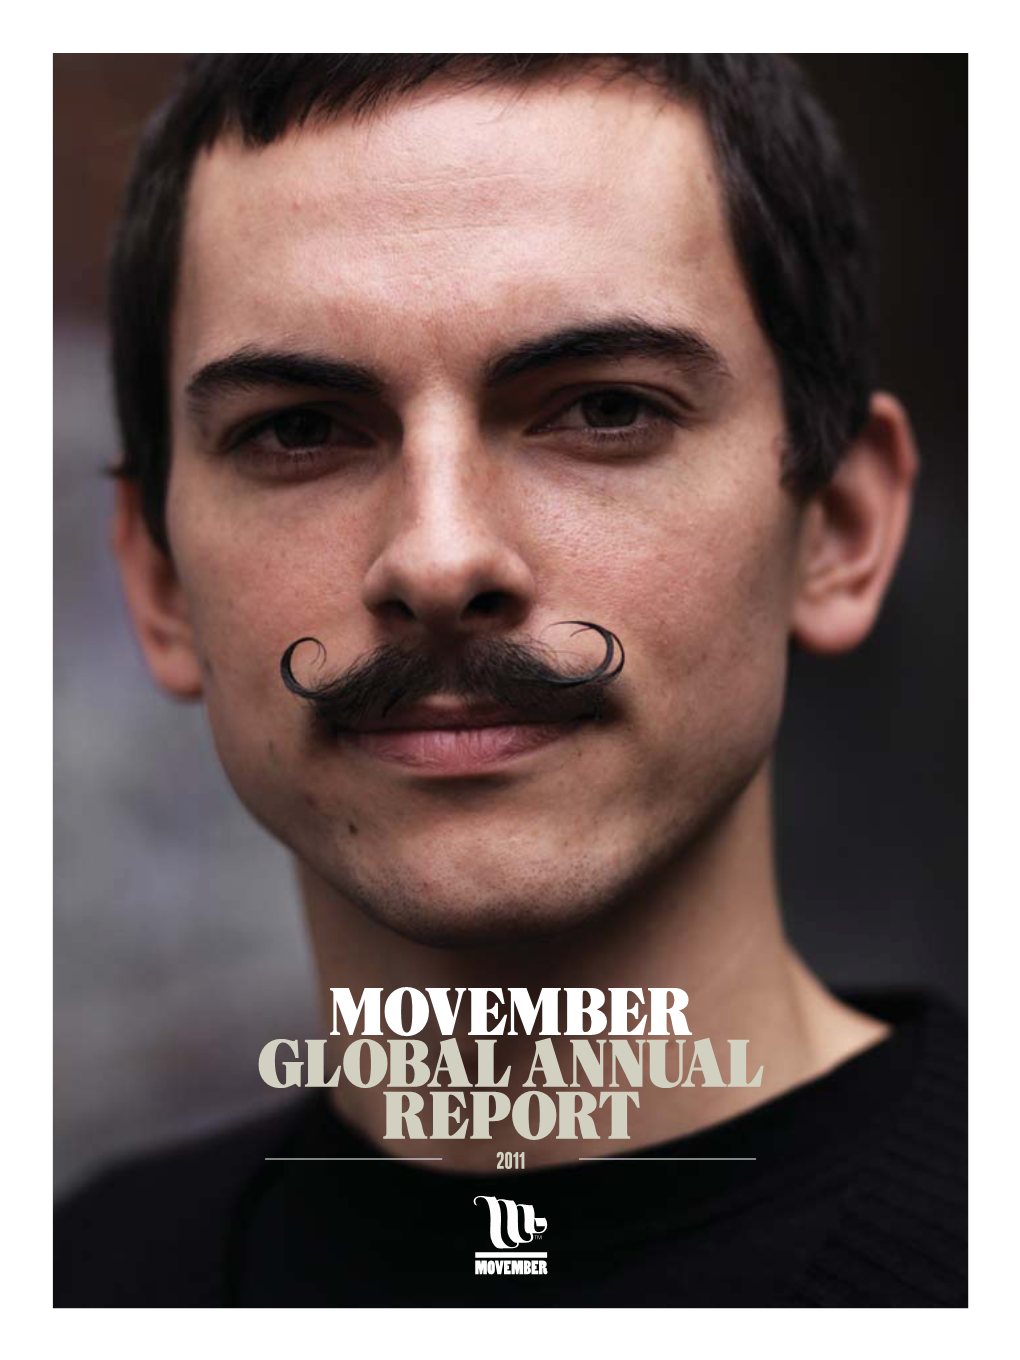 Movember Global Annual Report